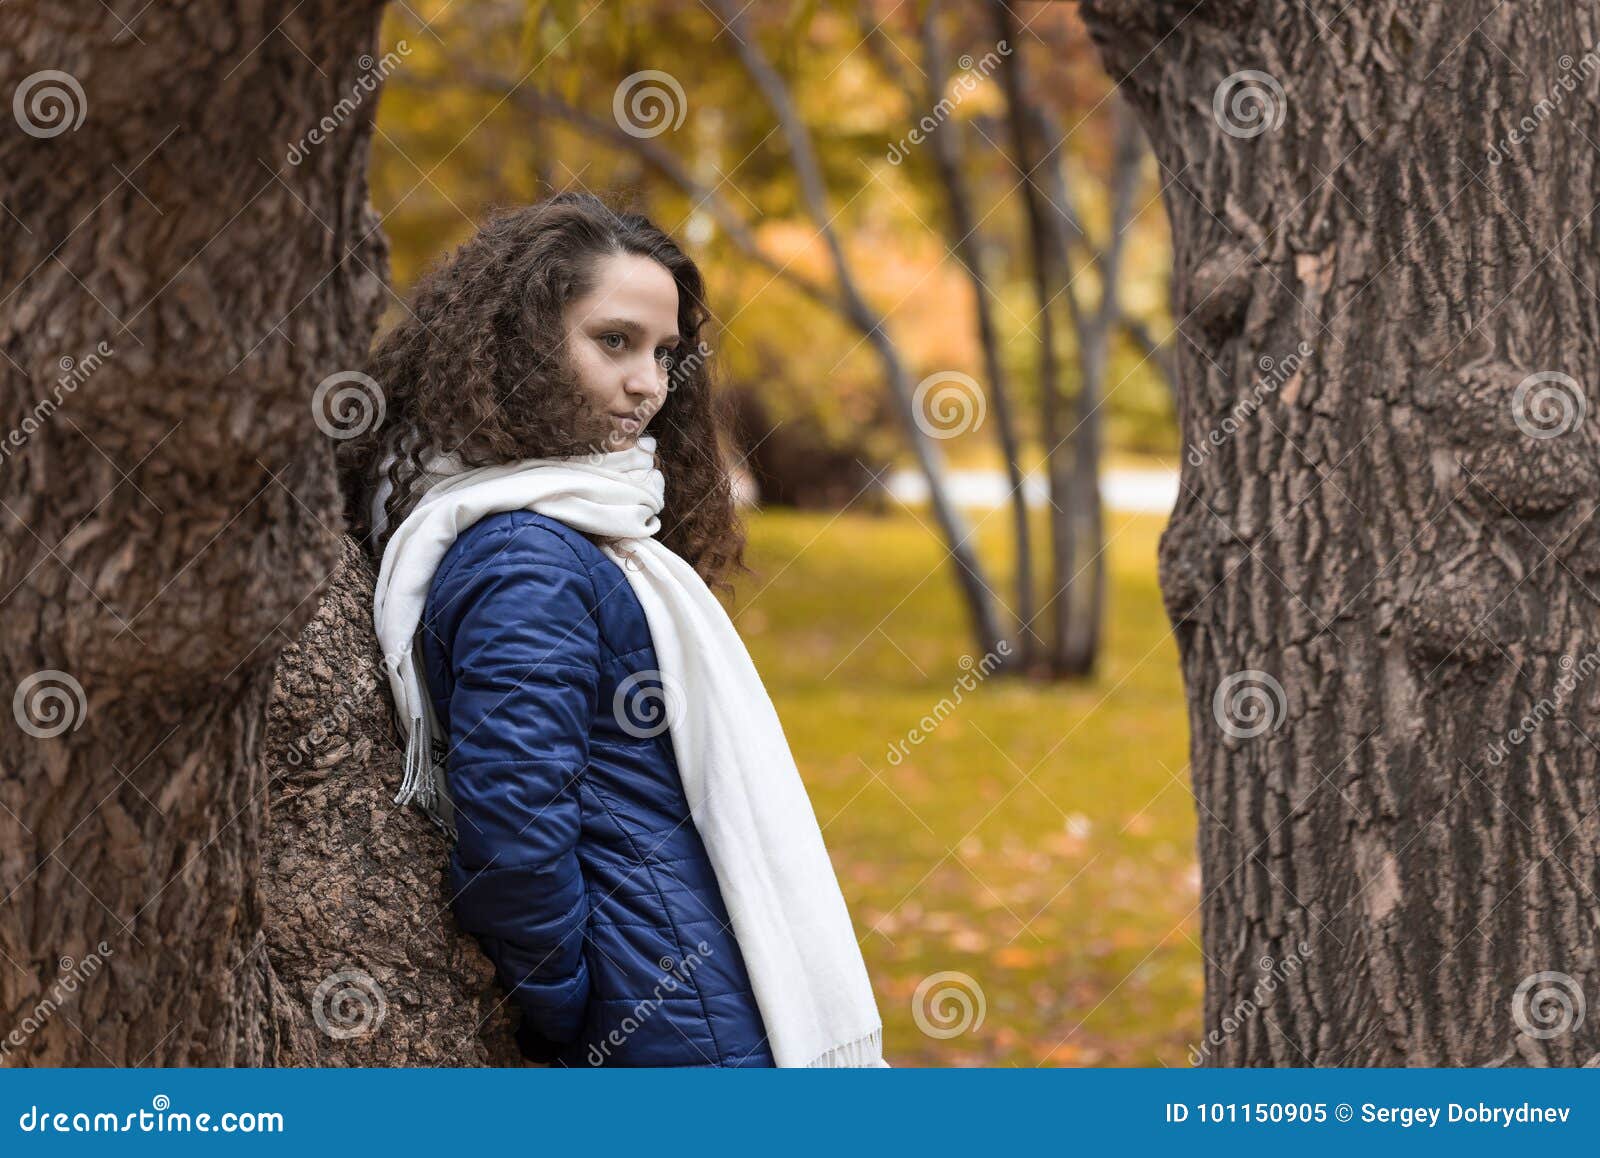 Girl with Curly Hair at a Tree Trunk in an Autumn Park Stock Image ...